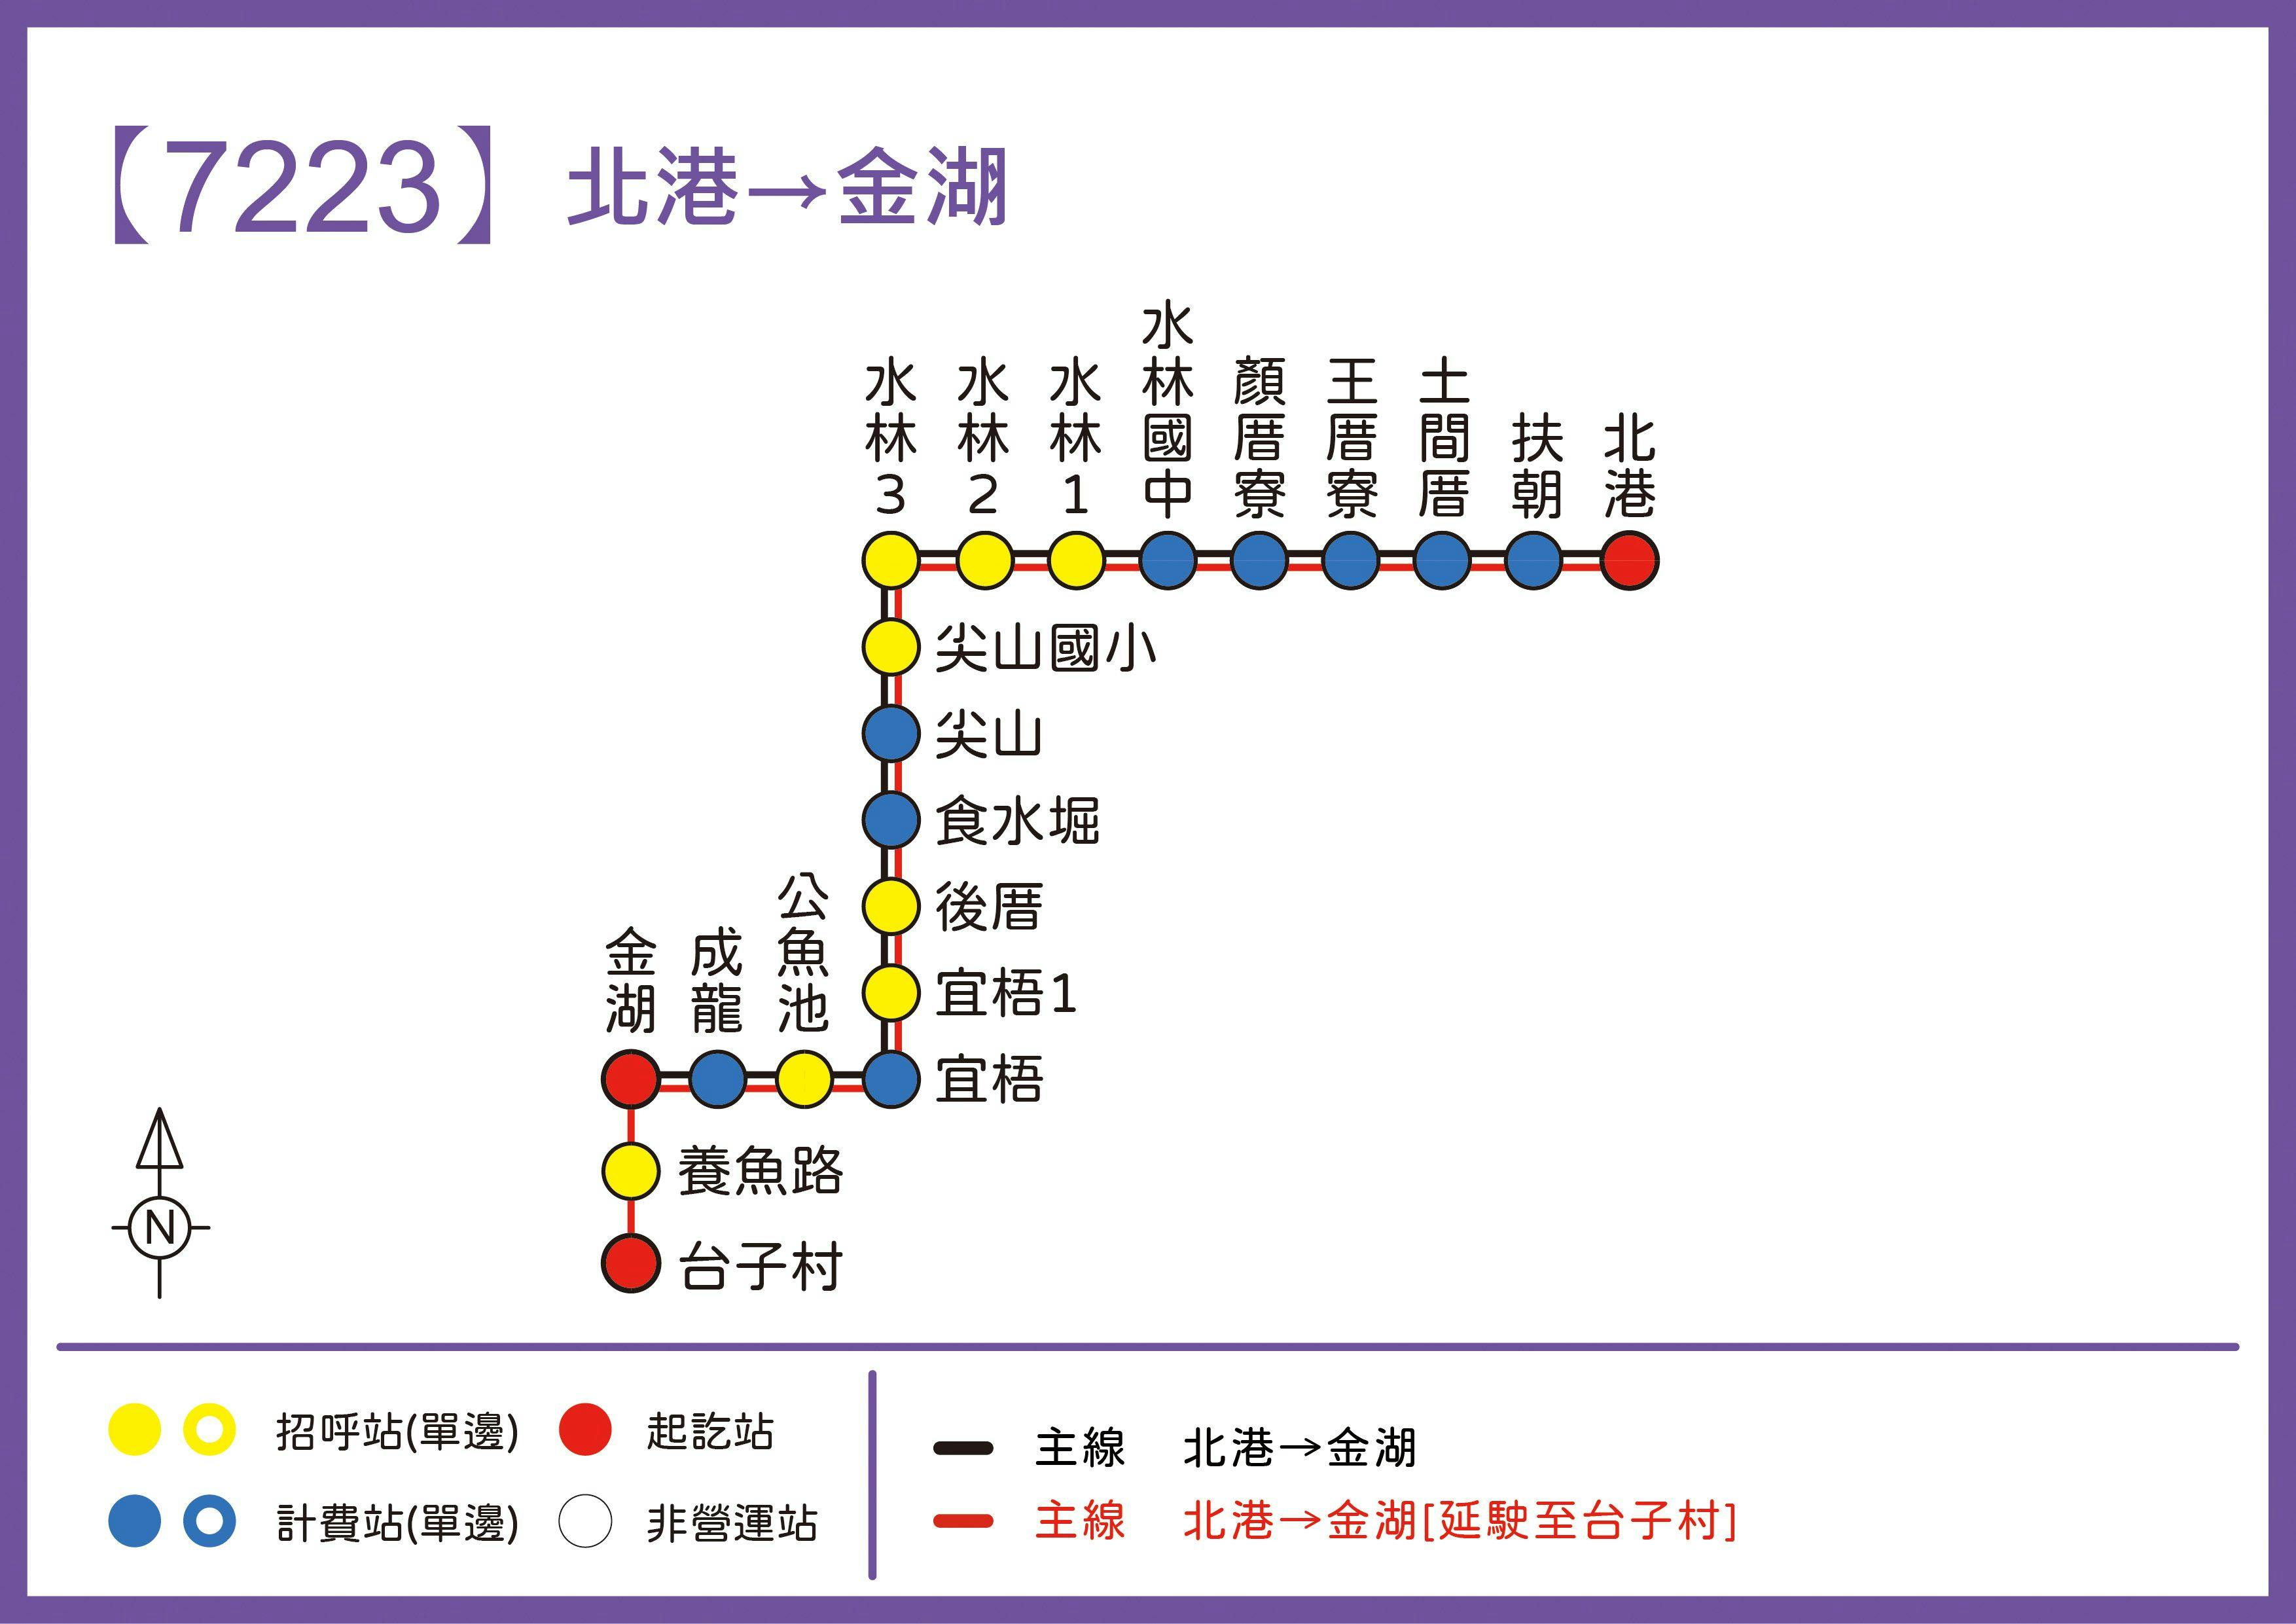 7223Route Map-Chiayi Bus